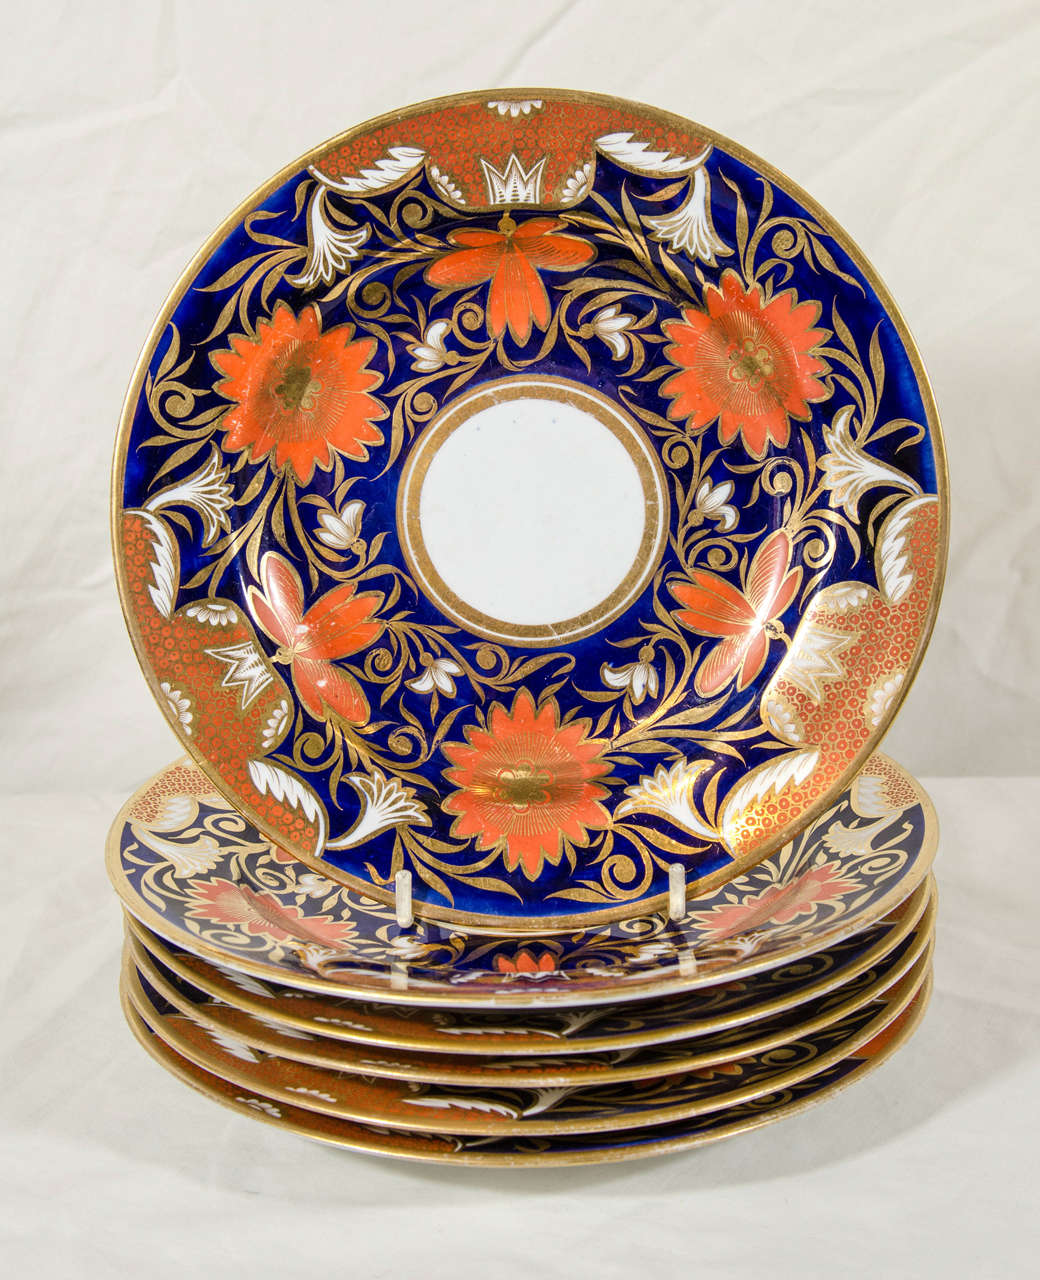 The Prince of Wales Feathers mark on this group of Spode dishes indicates that this pattern was part of the prince's collection. Made between 1806-1811 it is a stunning example of Regency porcelain decorated with orange blossoms, flowers and gilded